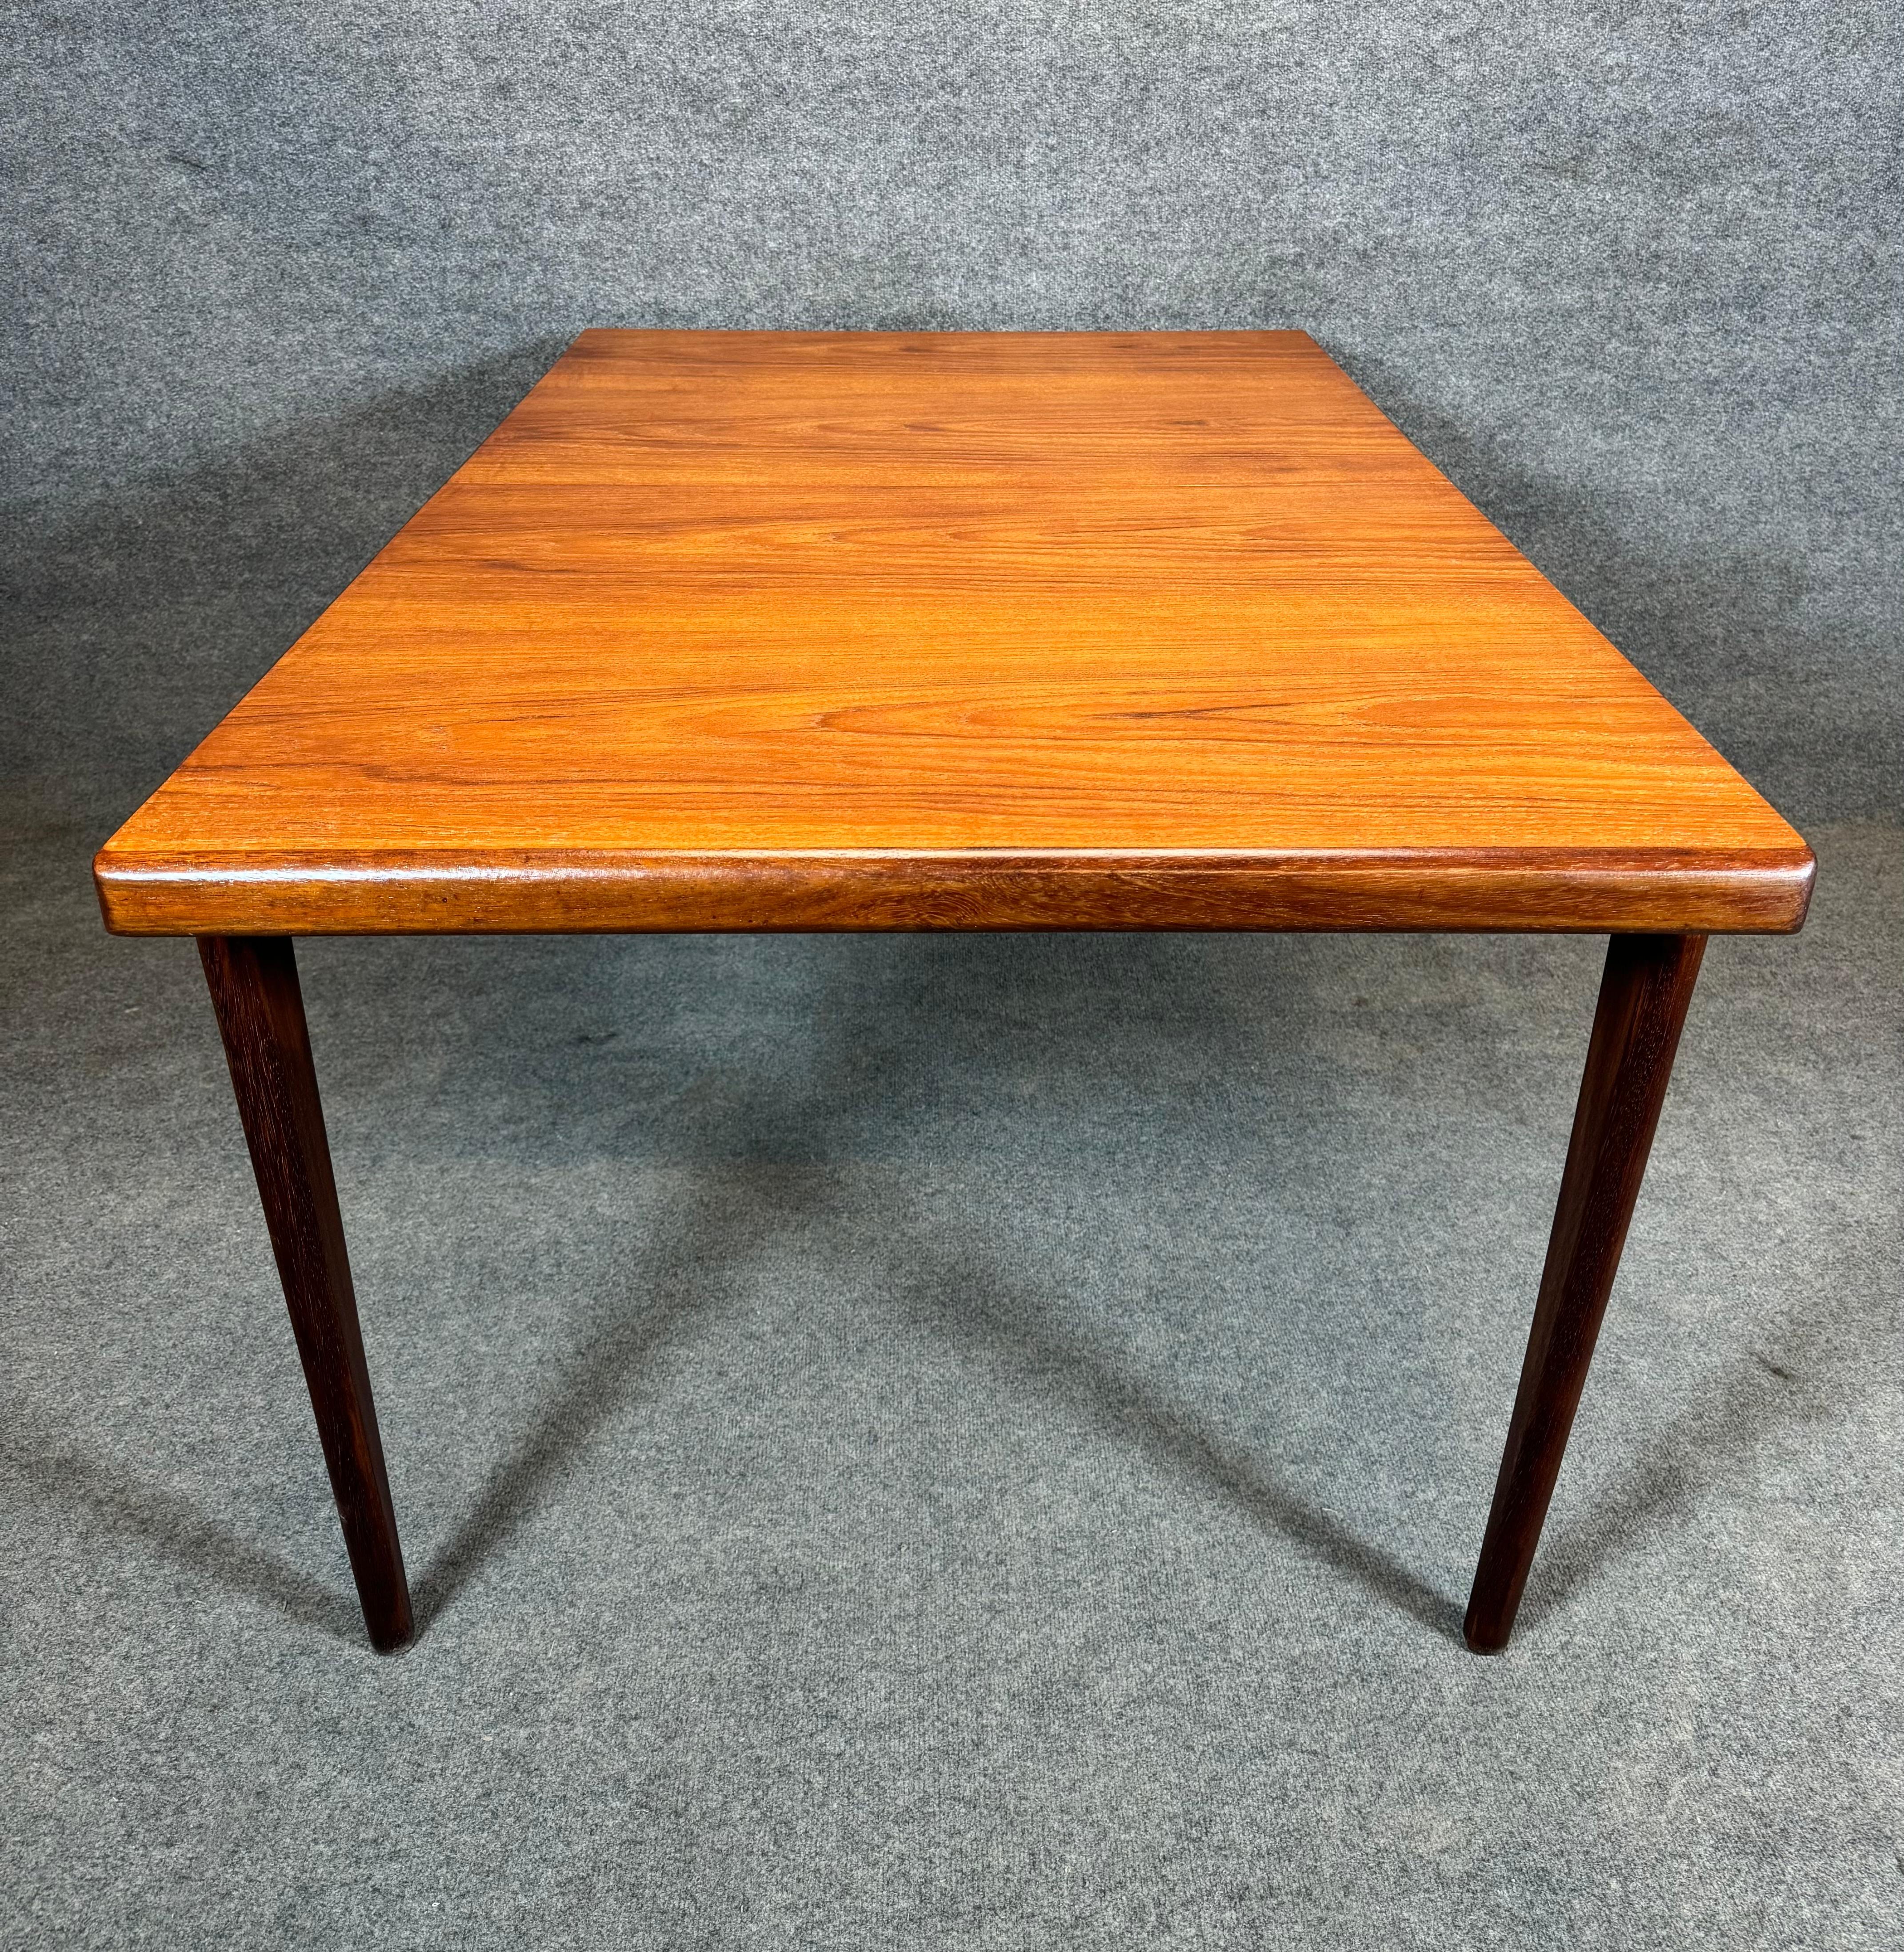 Woodwork Vintage Mid Century Modern Teak Dining Table by John Herbert for A. Younger Ltd. For Sale